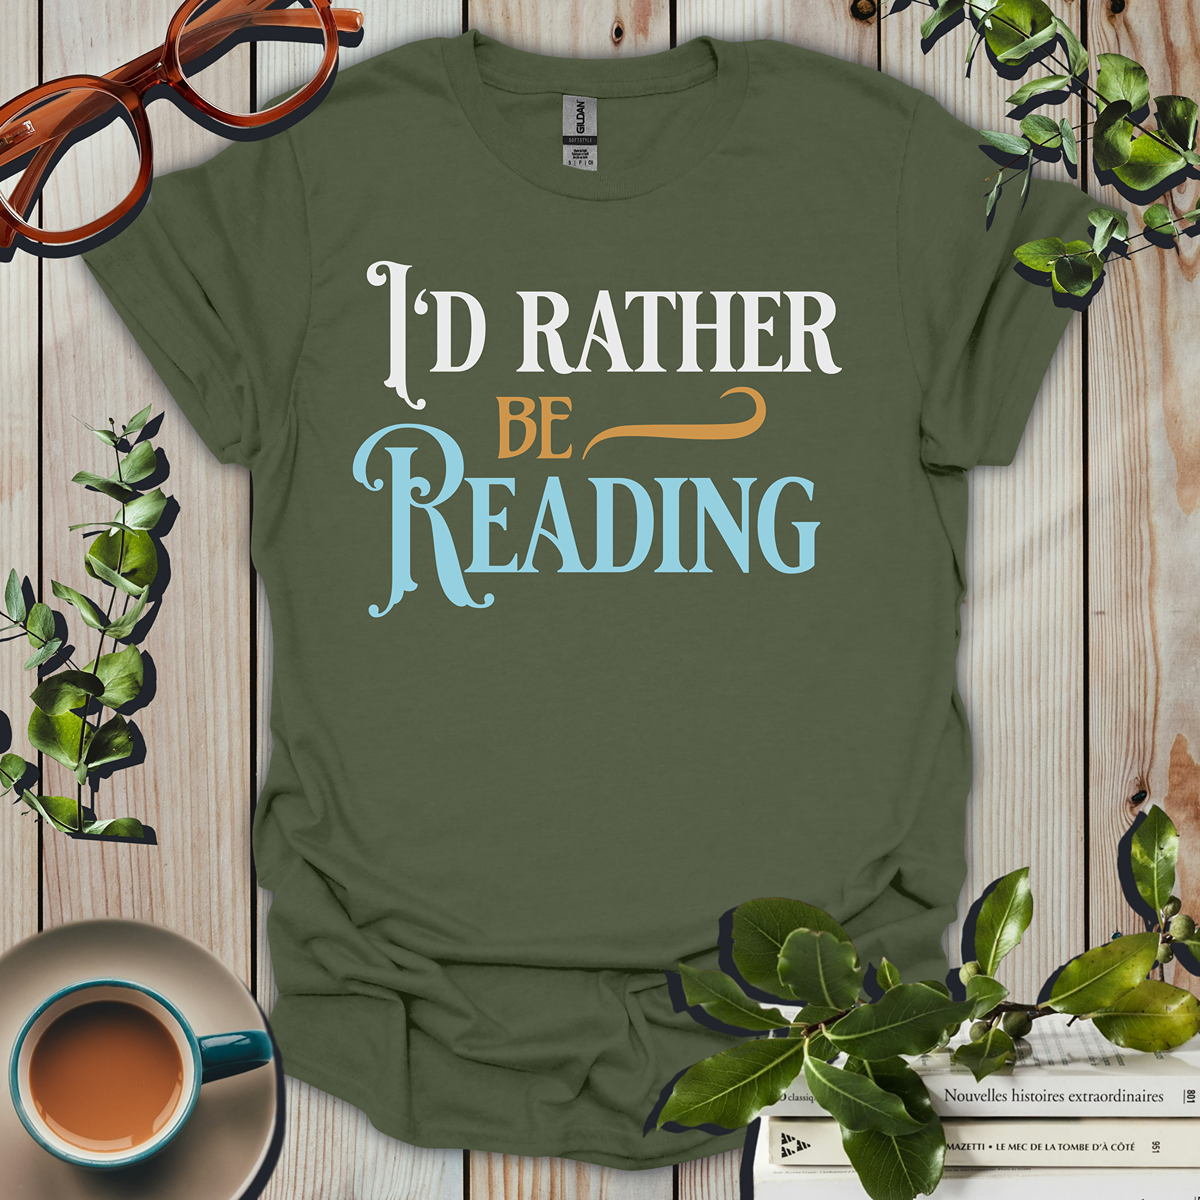 I'd Rather Be Reading T-Shirt